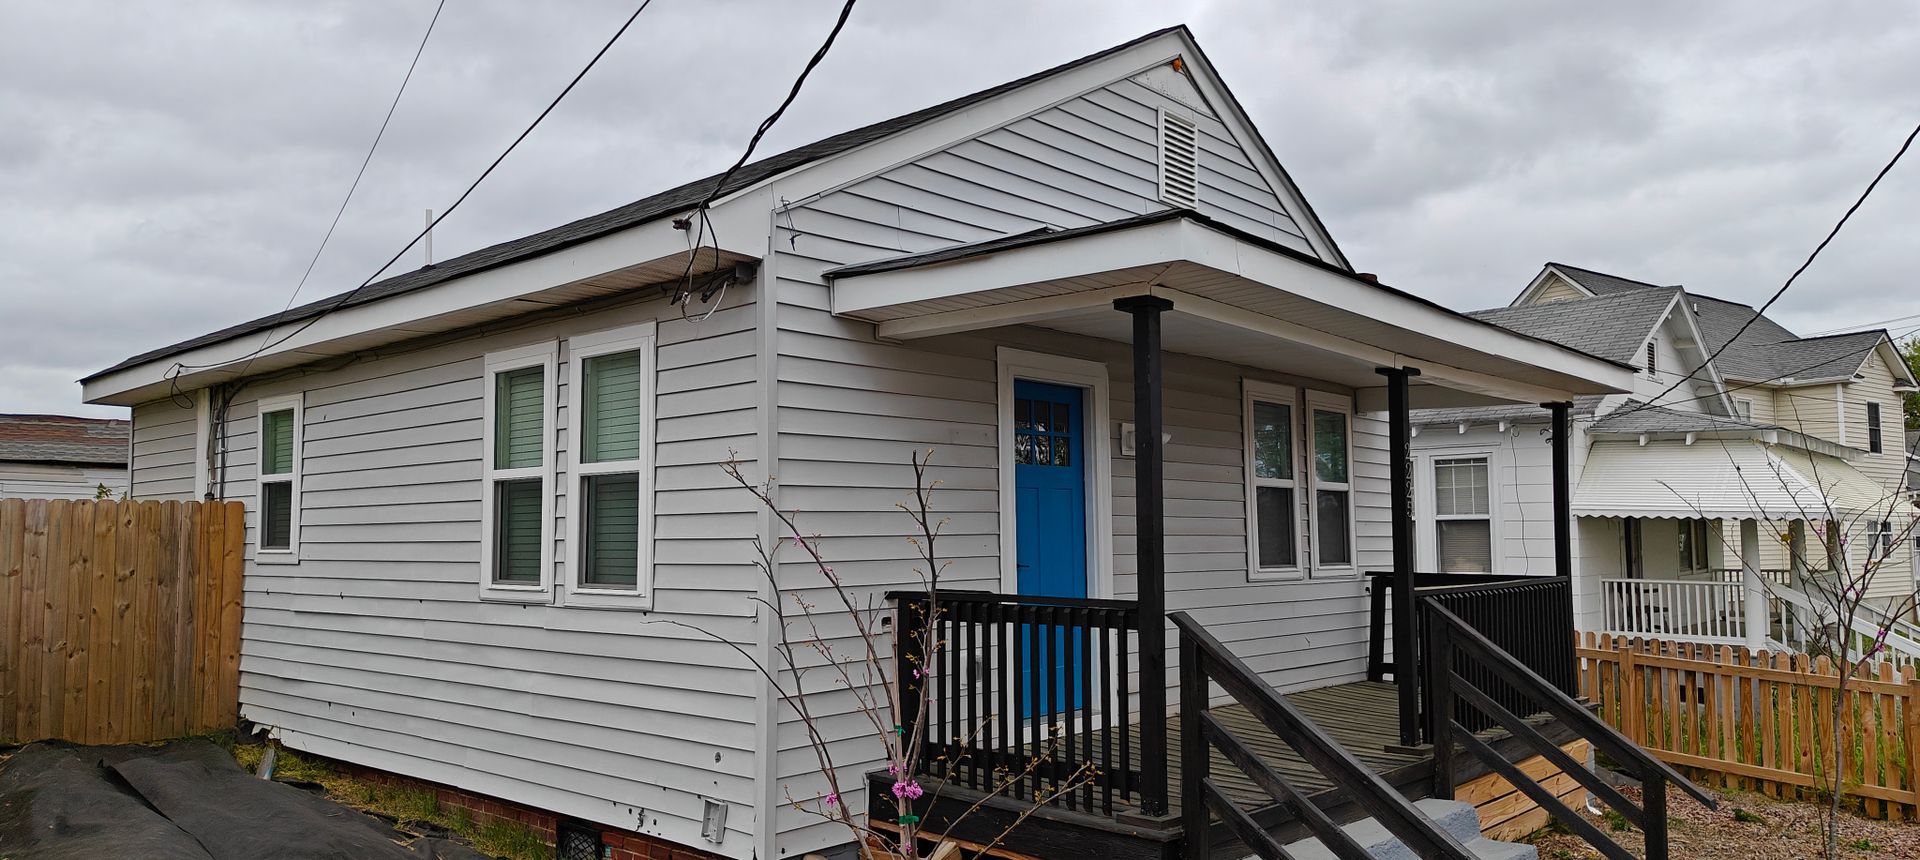 2 BR/ 1 BA Newly Renovated Two Bedroom House! Available May 1st!